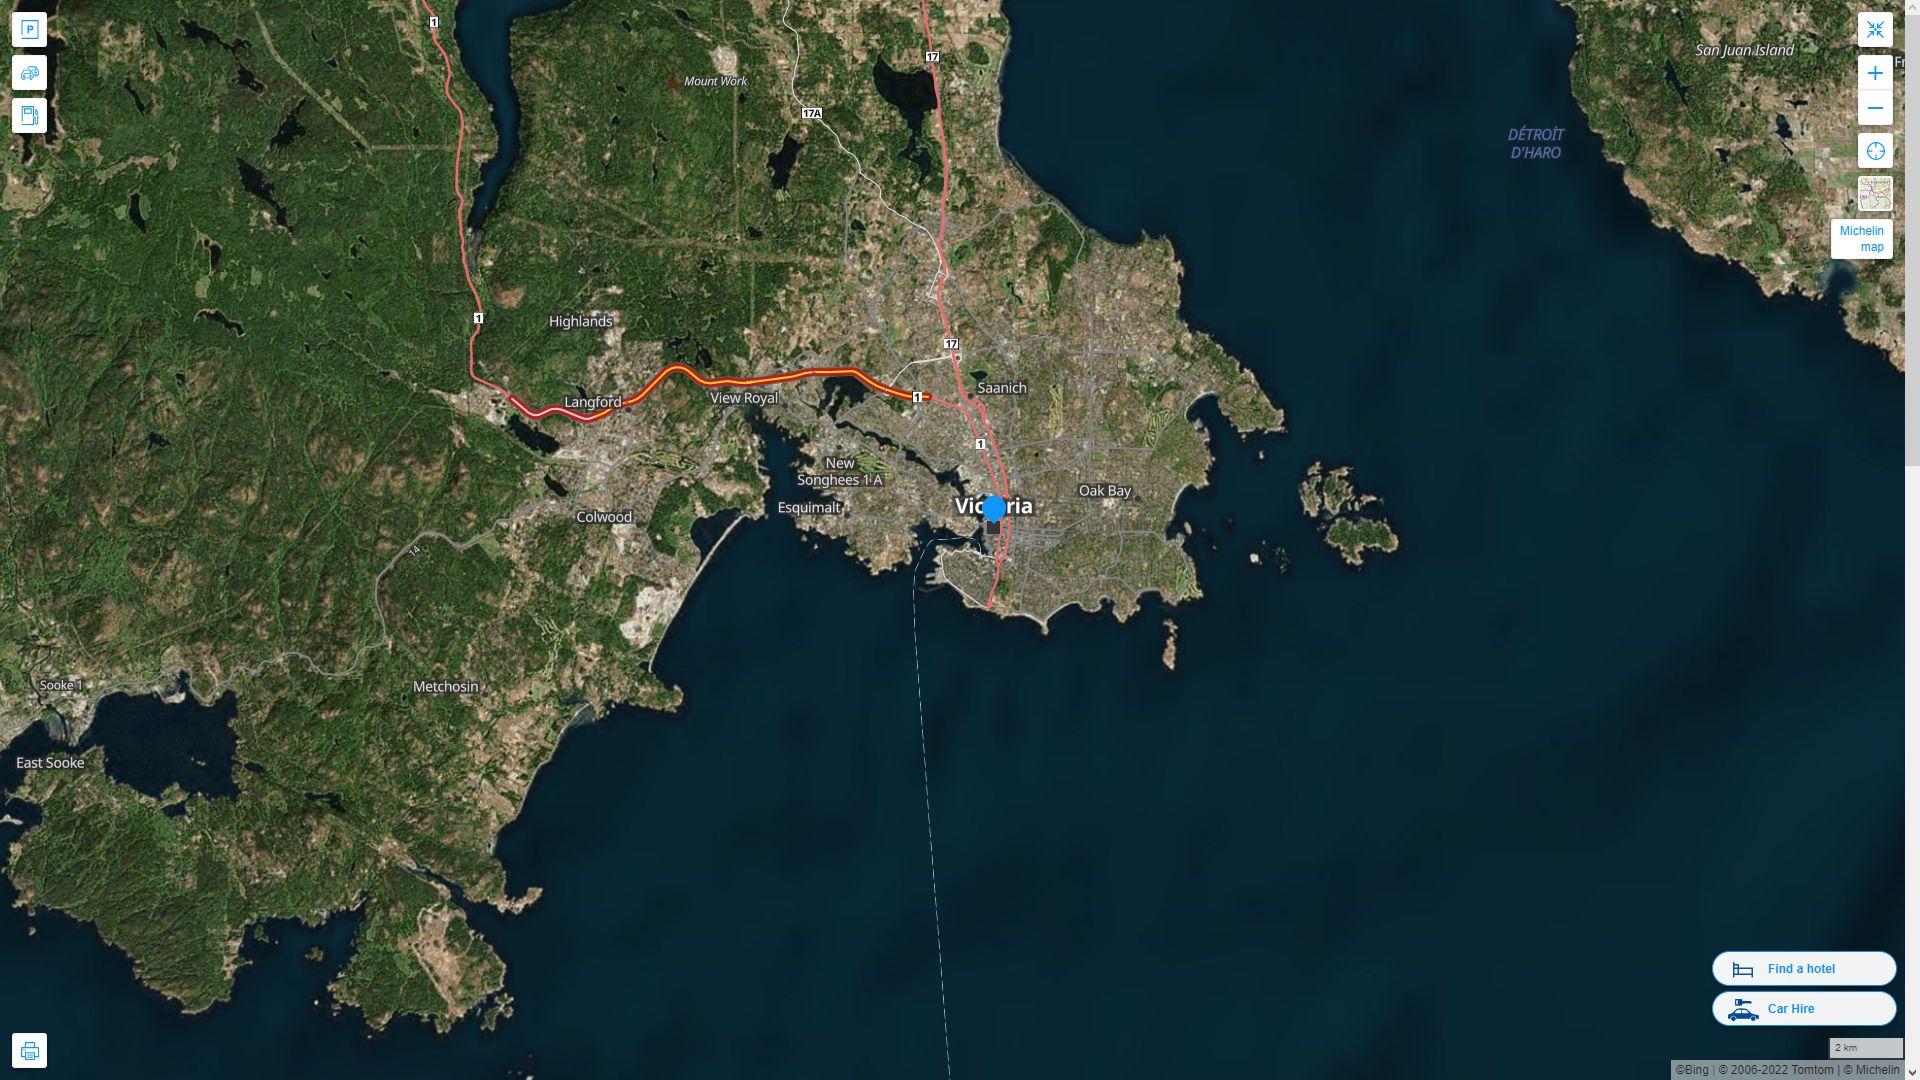 Victoria Highway and Road Map with Satellite View